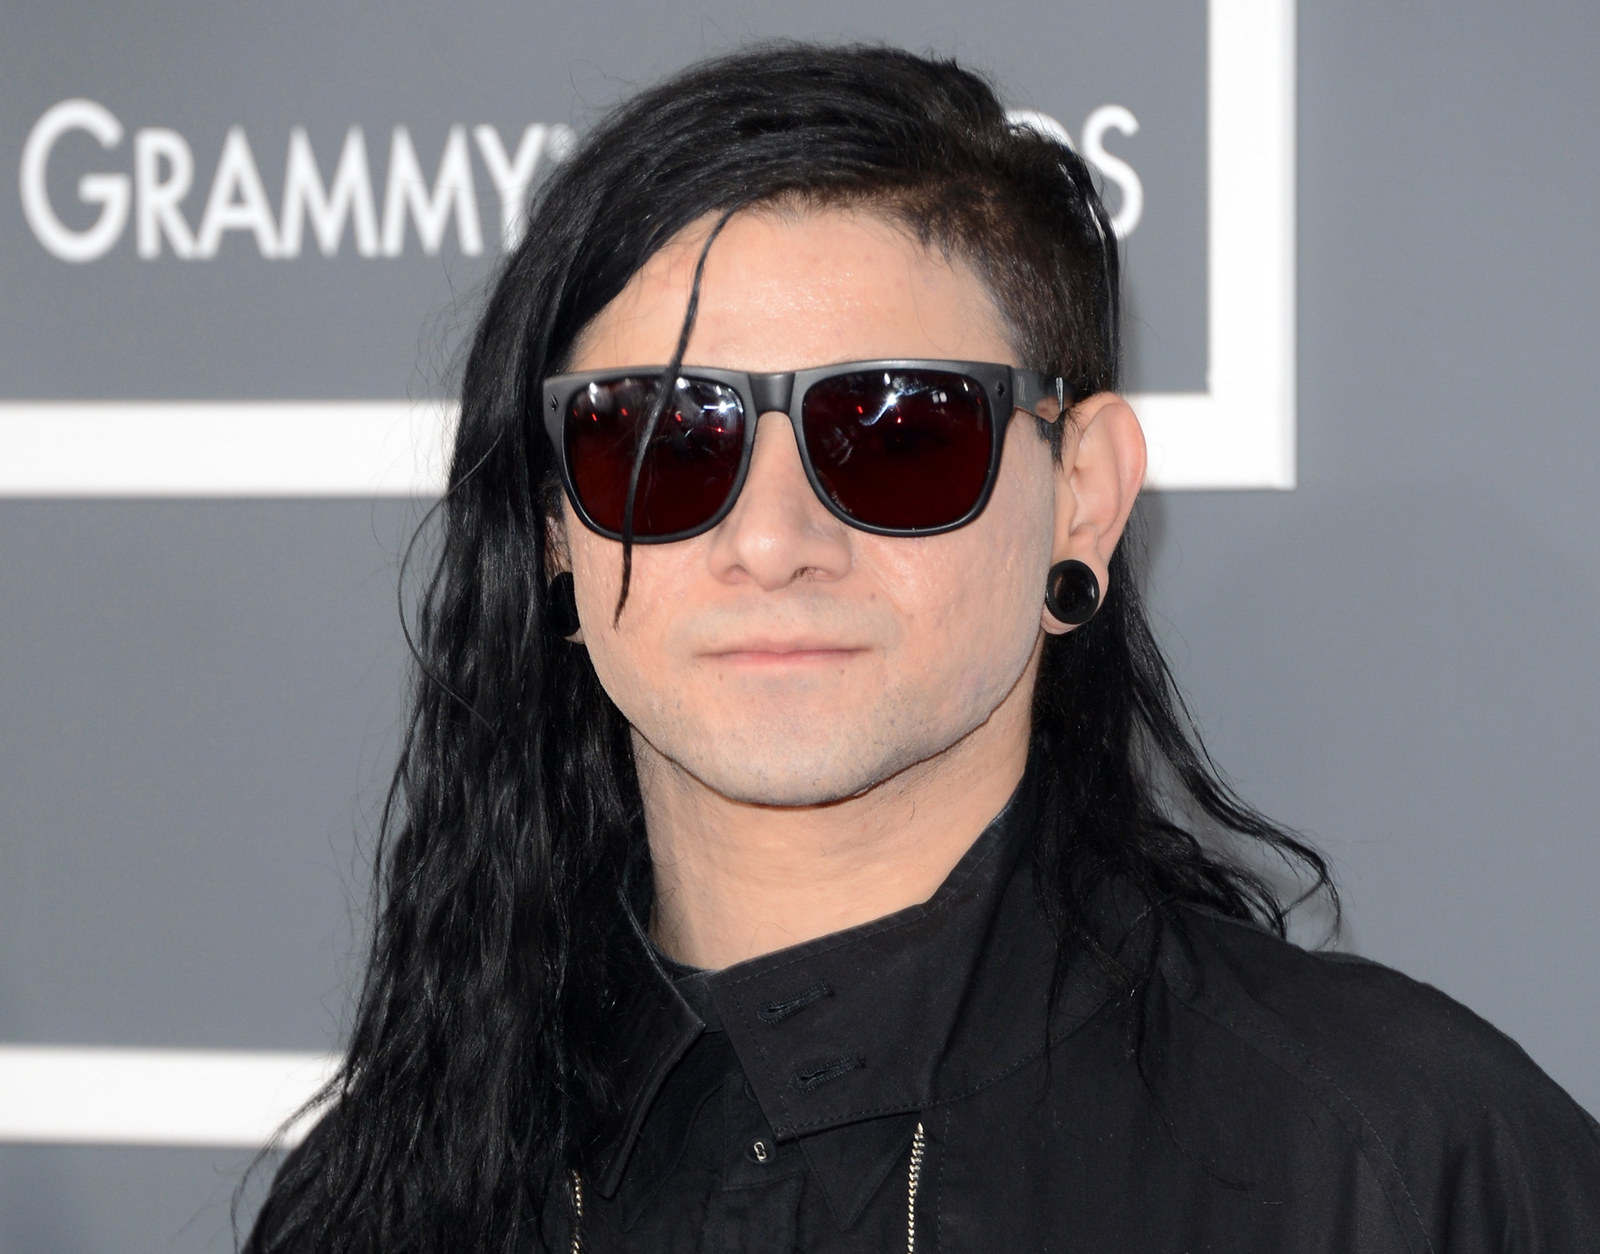 Honestly, if they called on Skrillex to play Corey Feldman in a Lifetime mo...